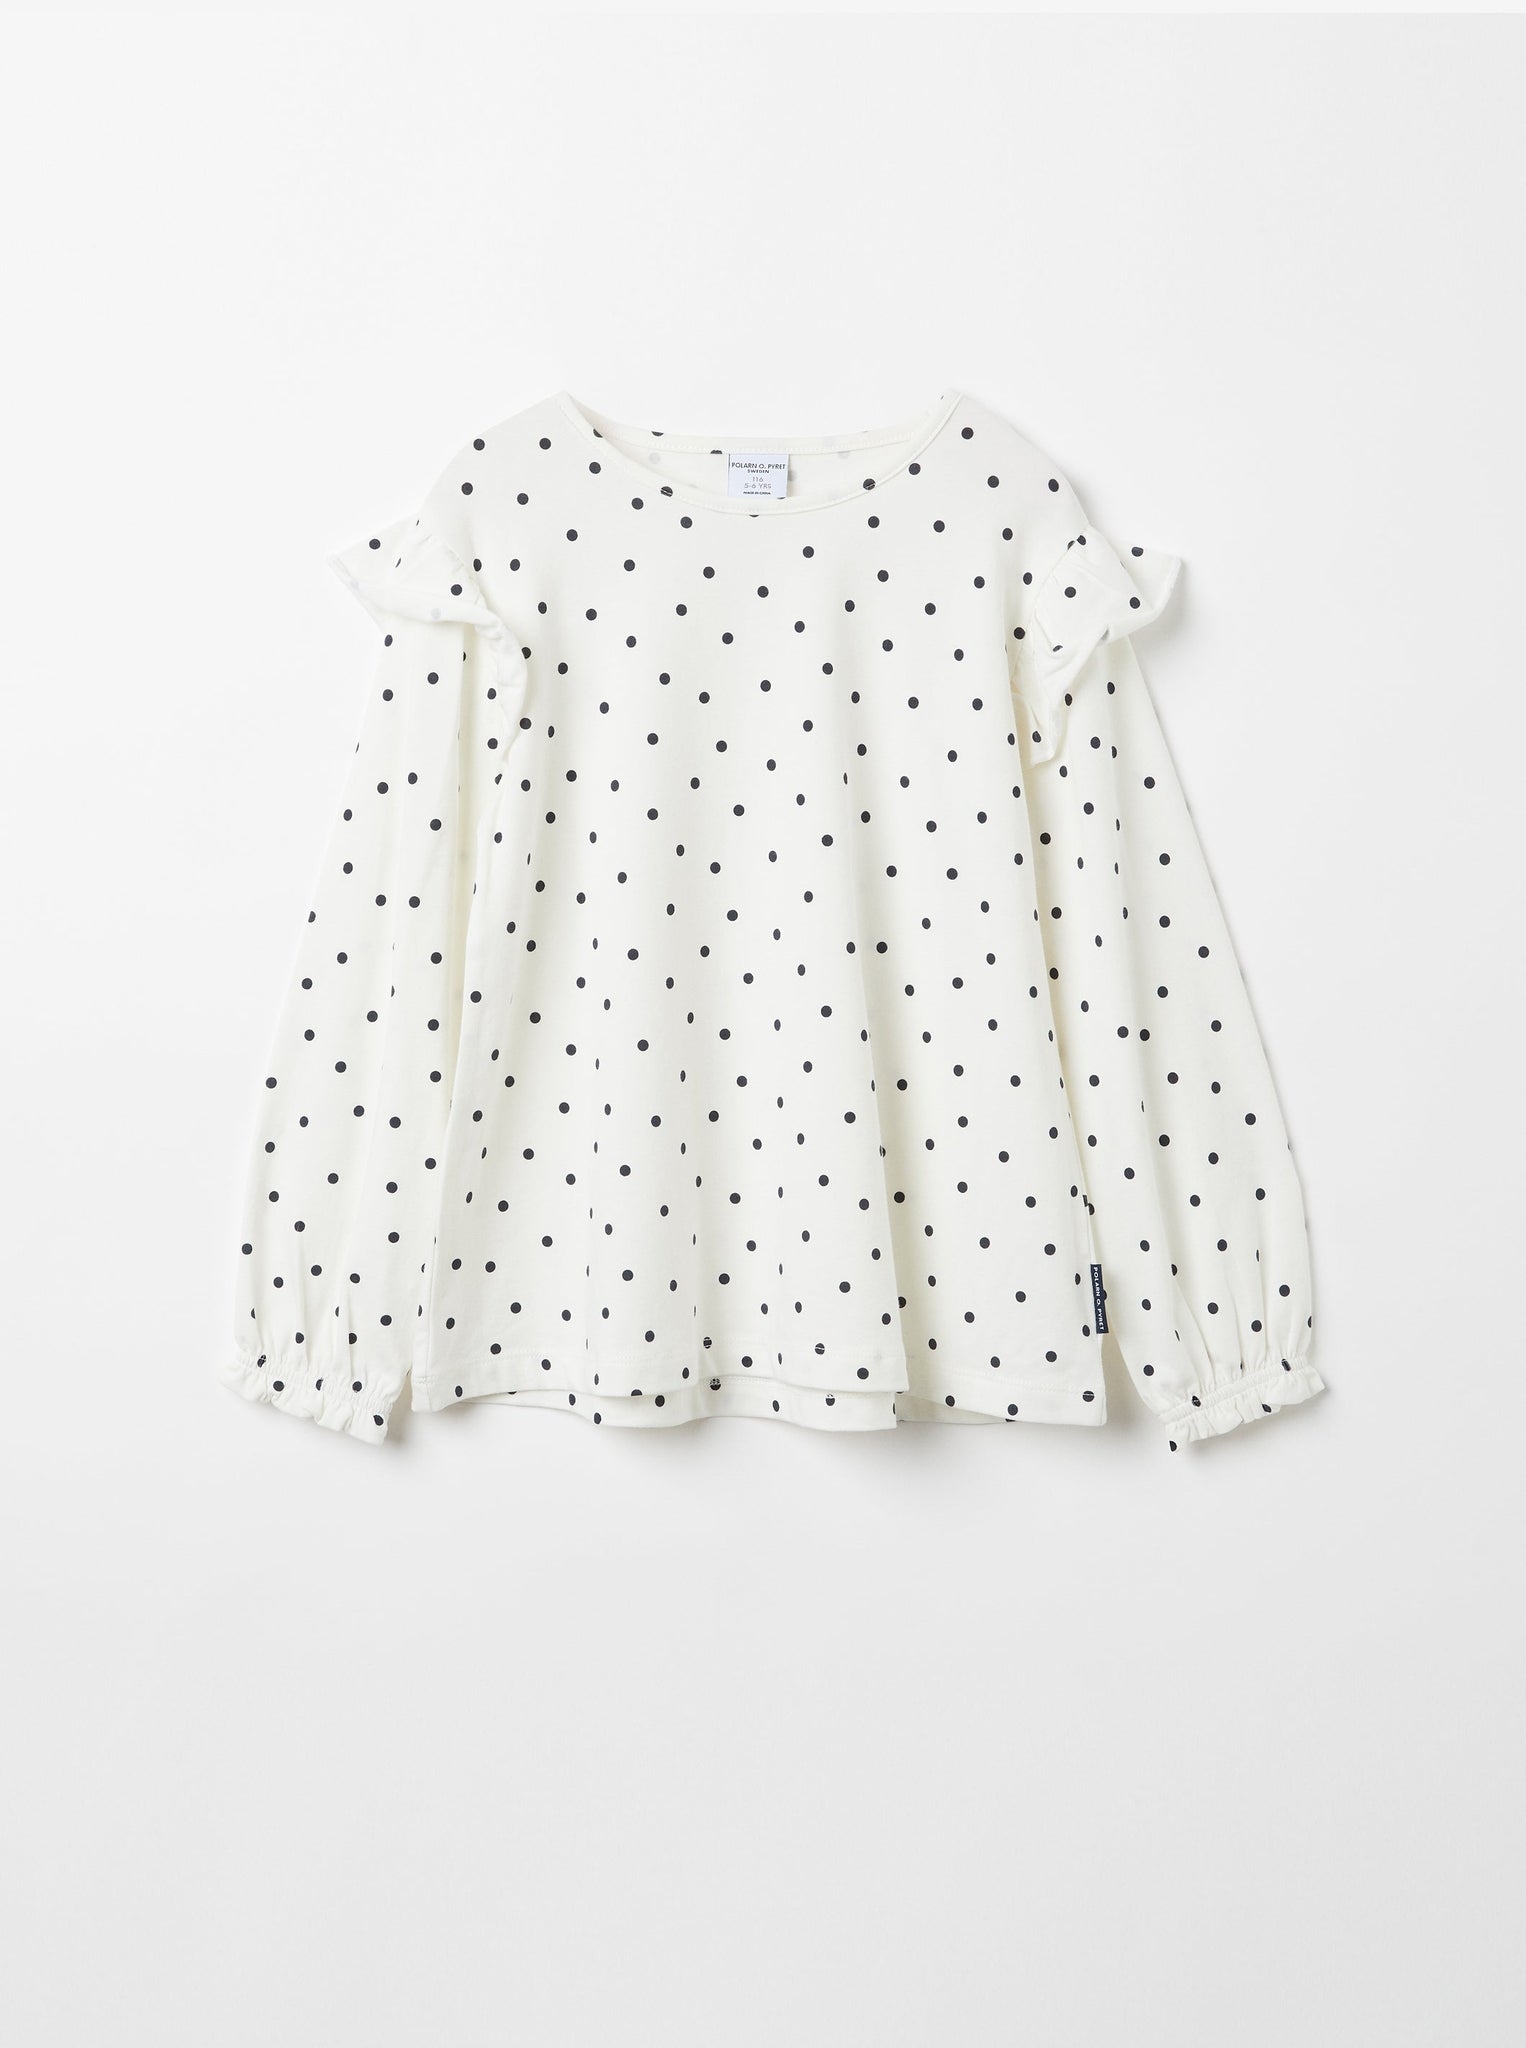 White Polka Dot Kids Top from the Polarn O. Pyret kidswear collection. Ethically produced kids clothing.